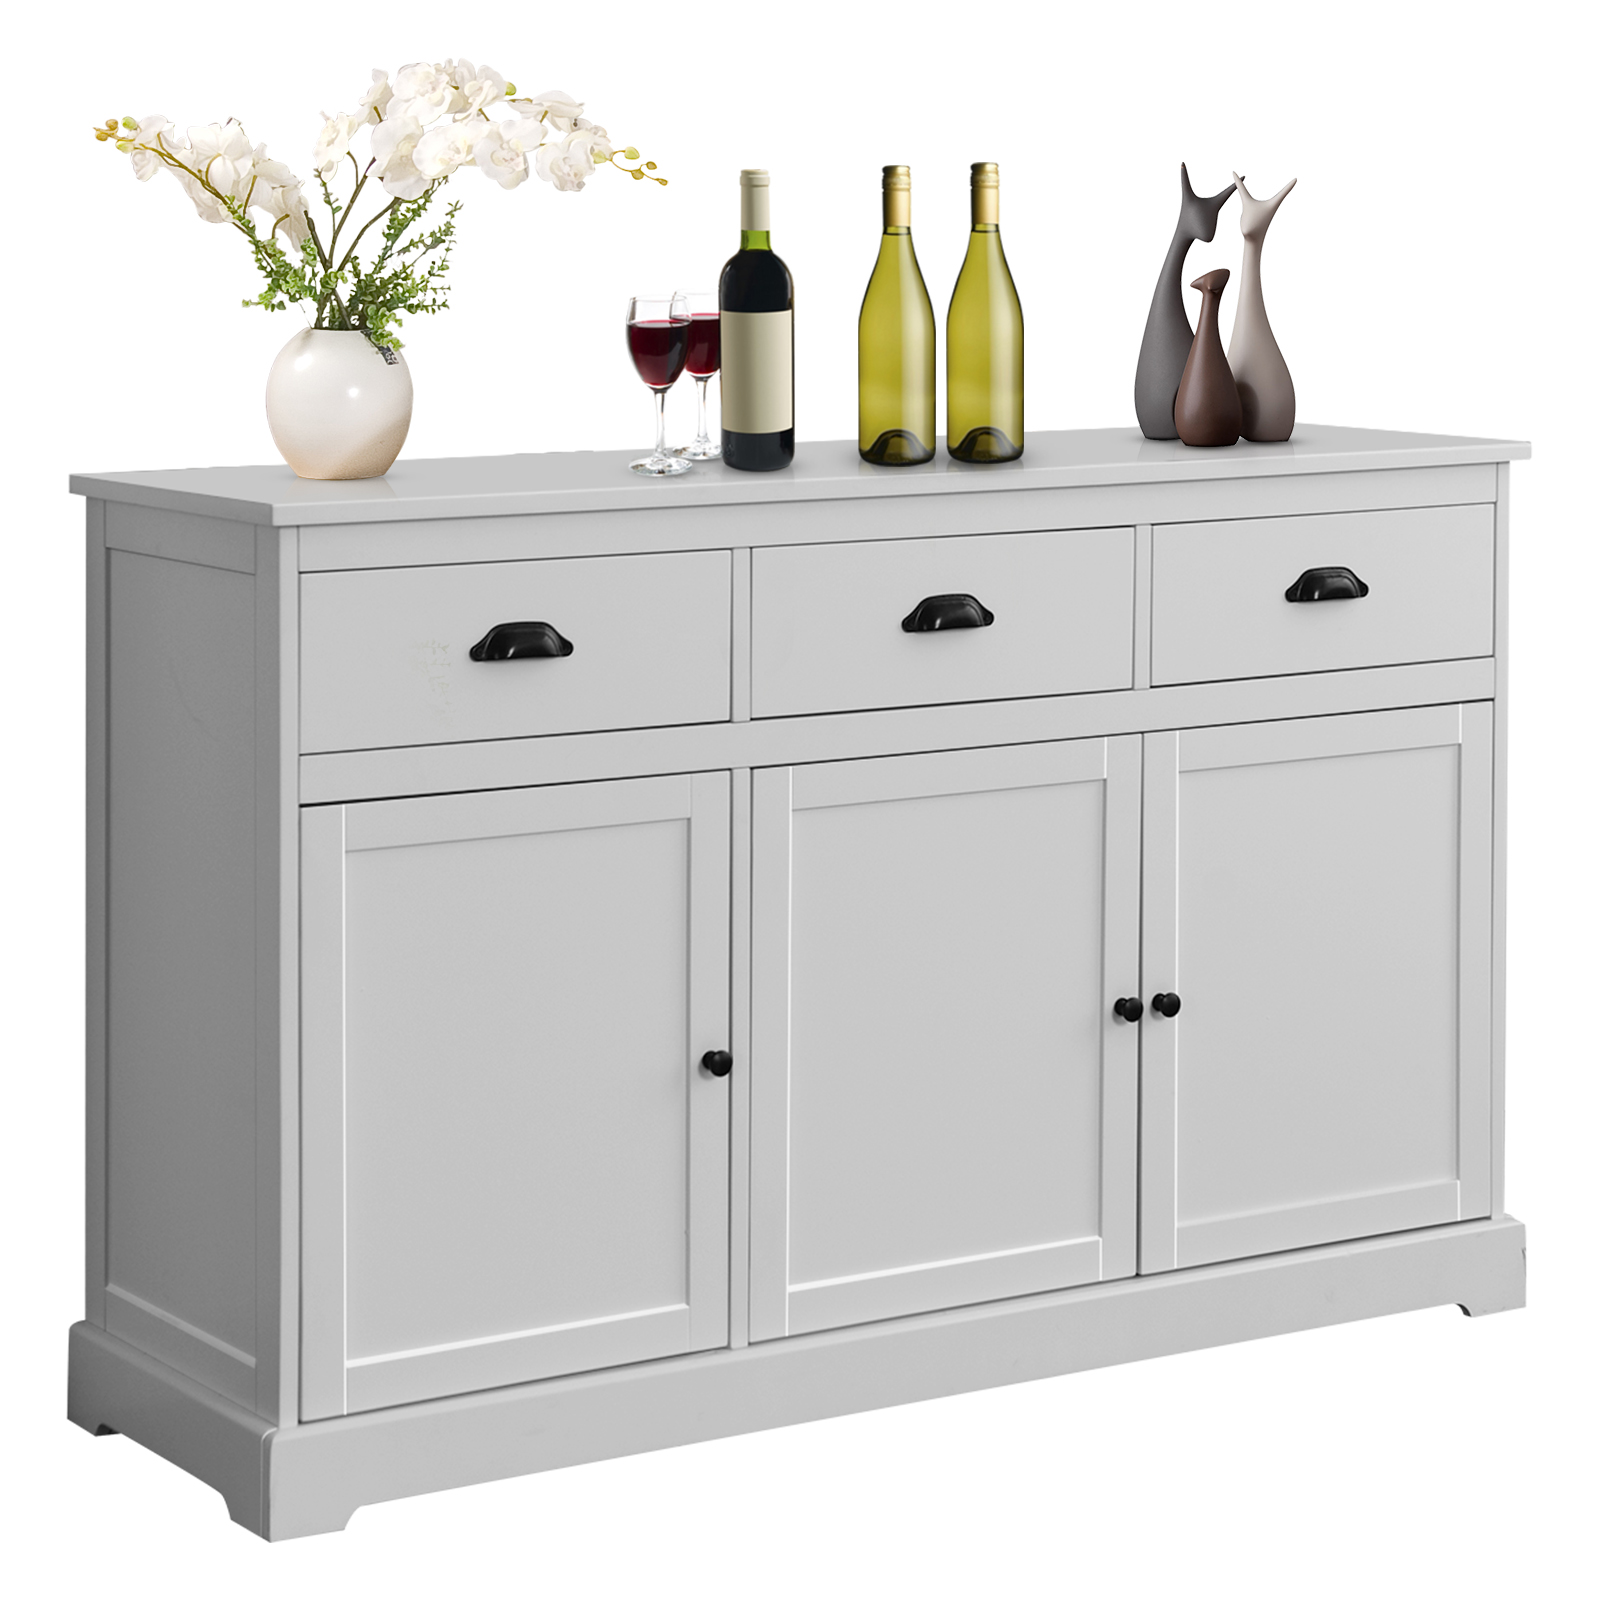 Buffet_Sideboard_with_2_Cabinets_and_3_Drawers_Grey-3.jpg